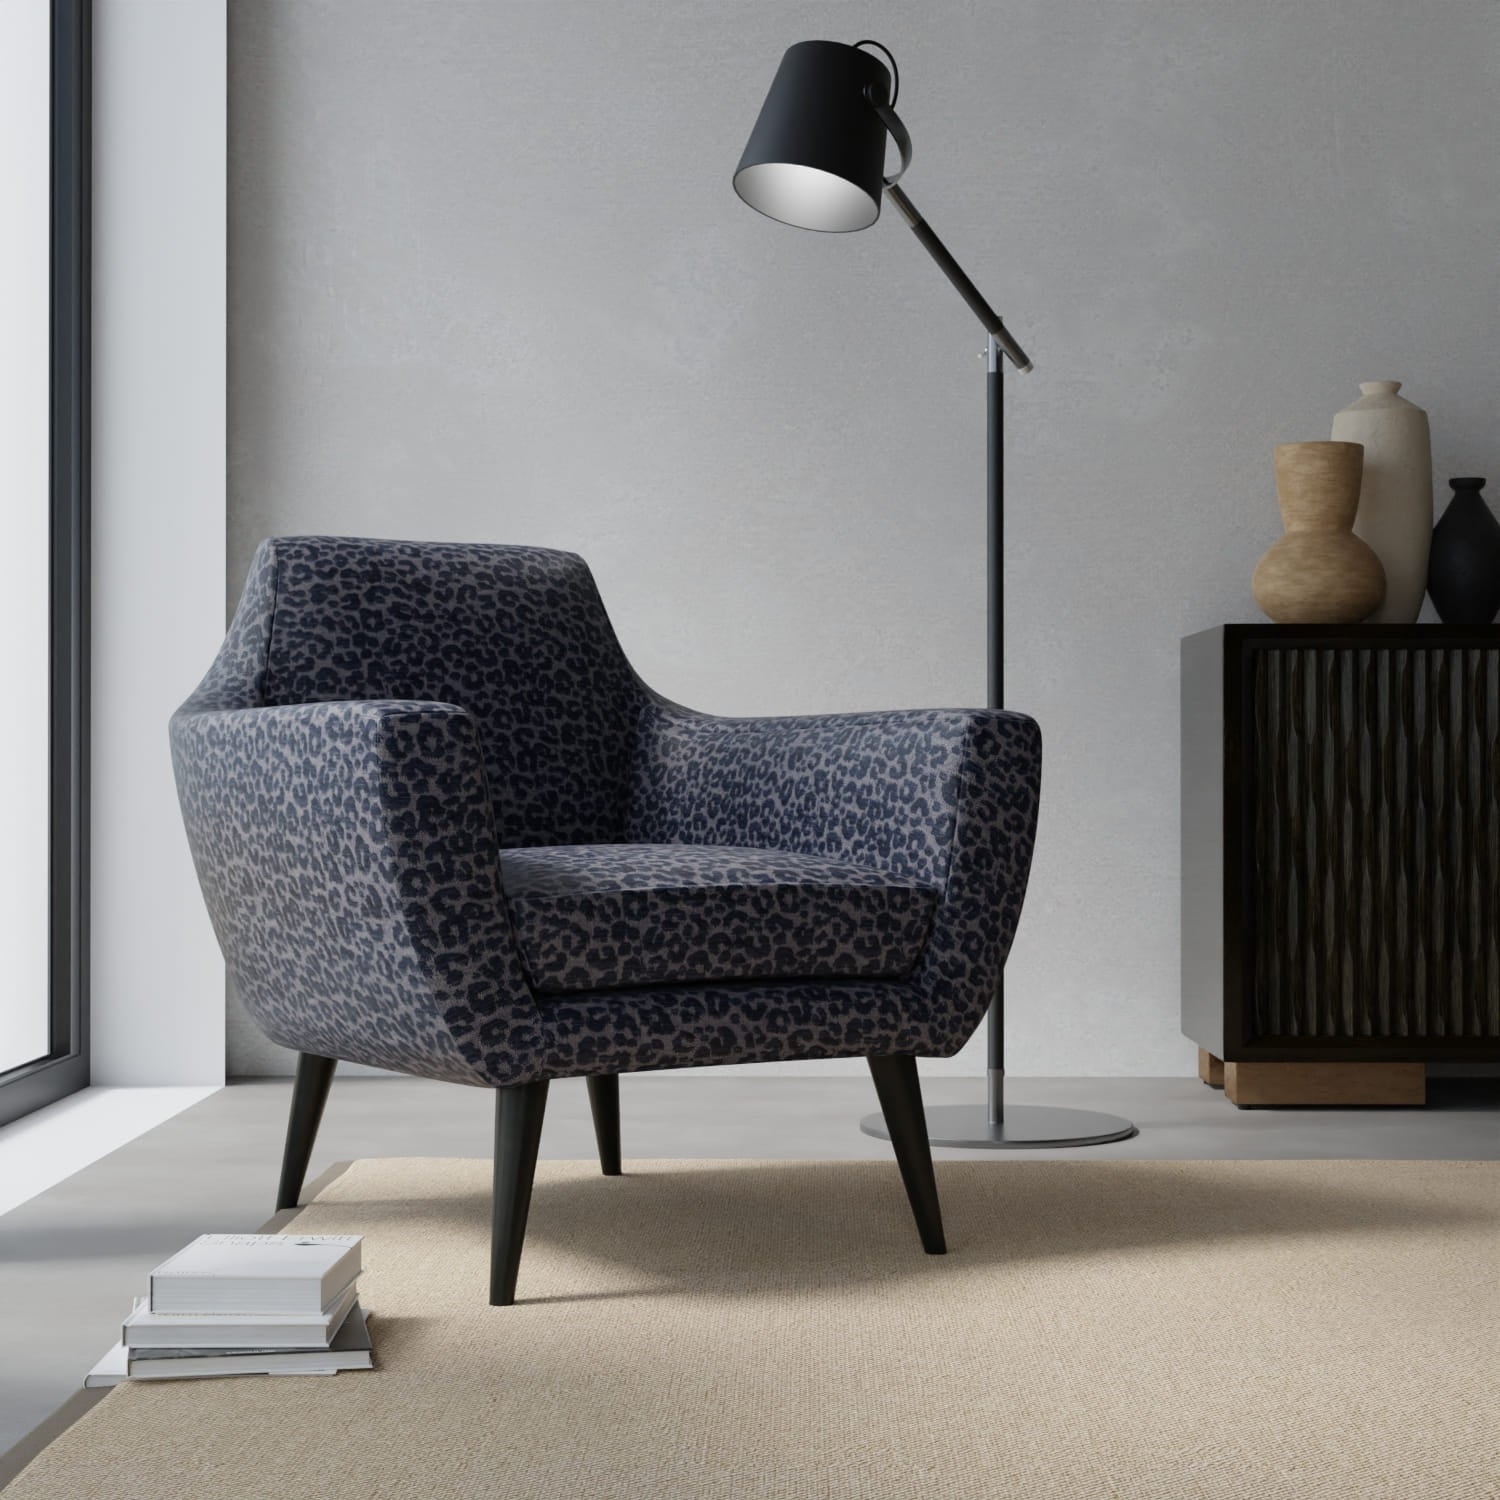 Bobbi Sapphire upholstered on a contemporary chair